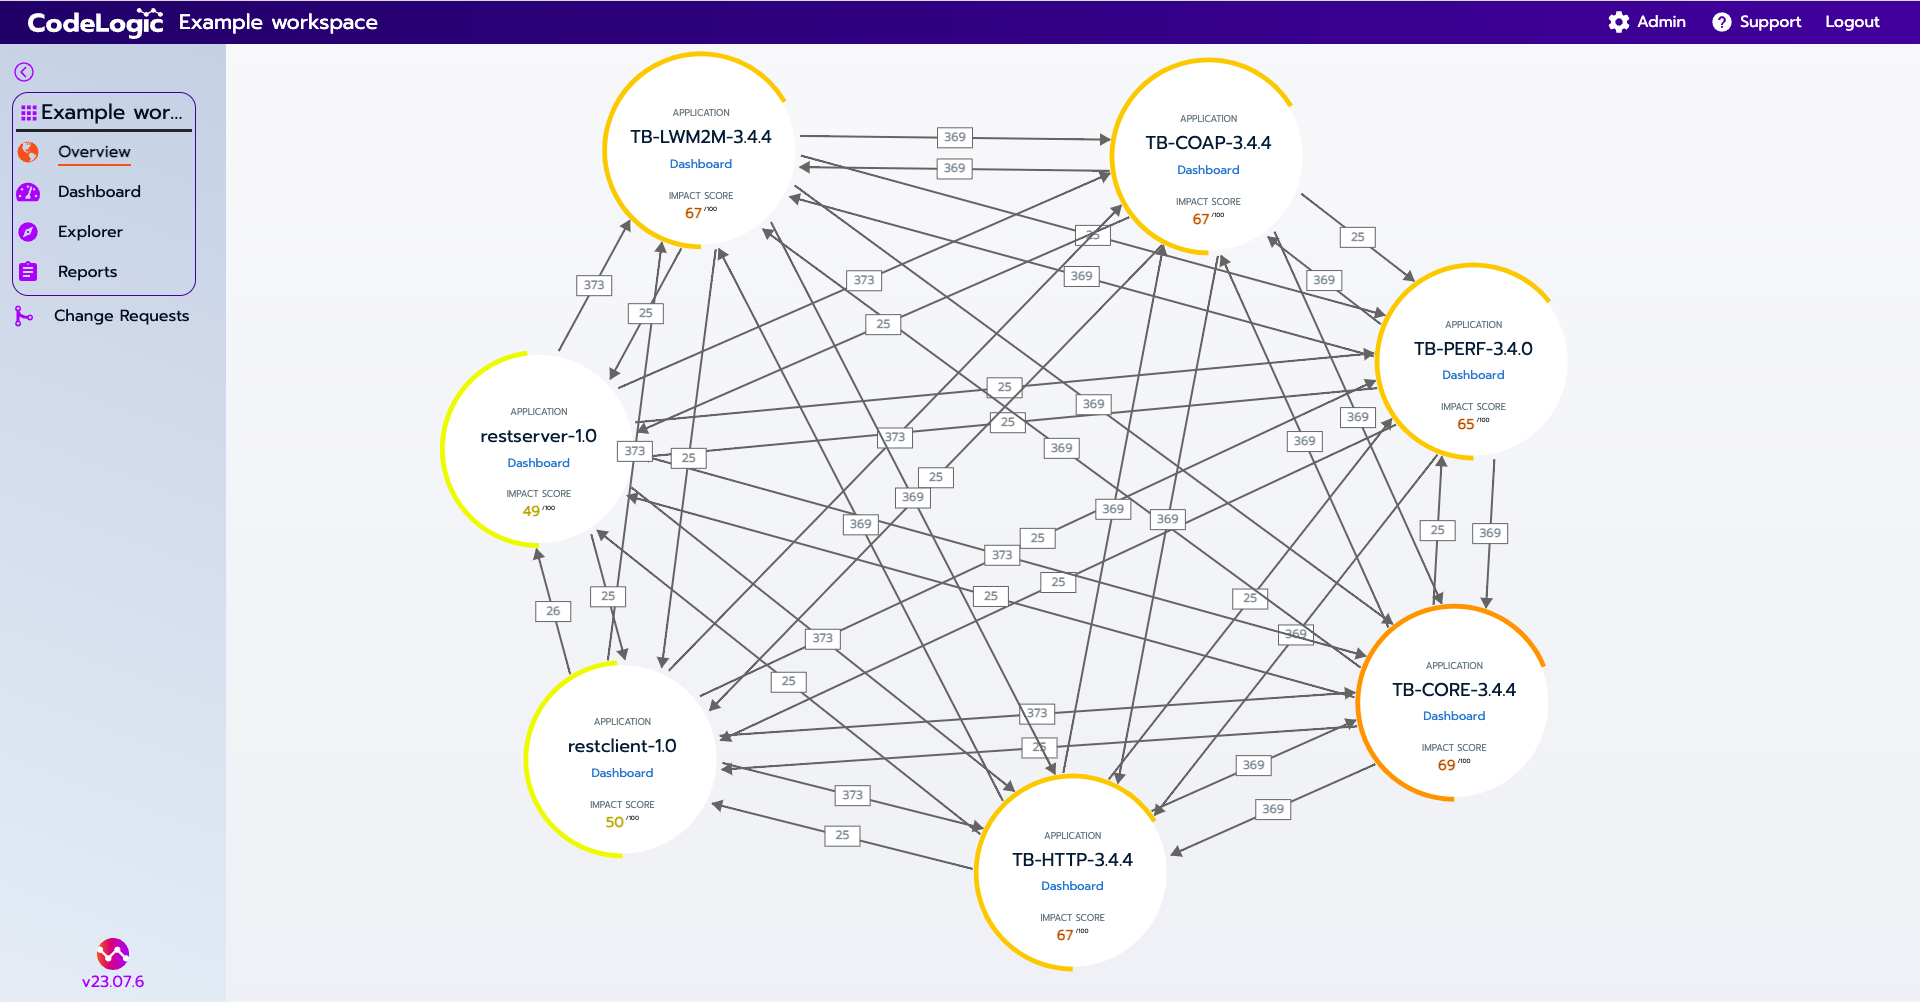 Visualize all the interconnections between services